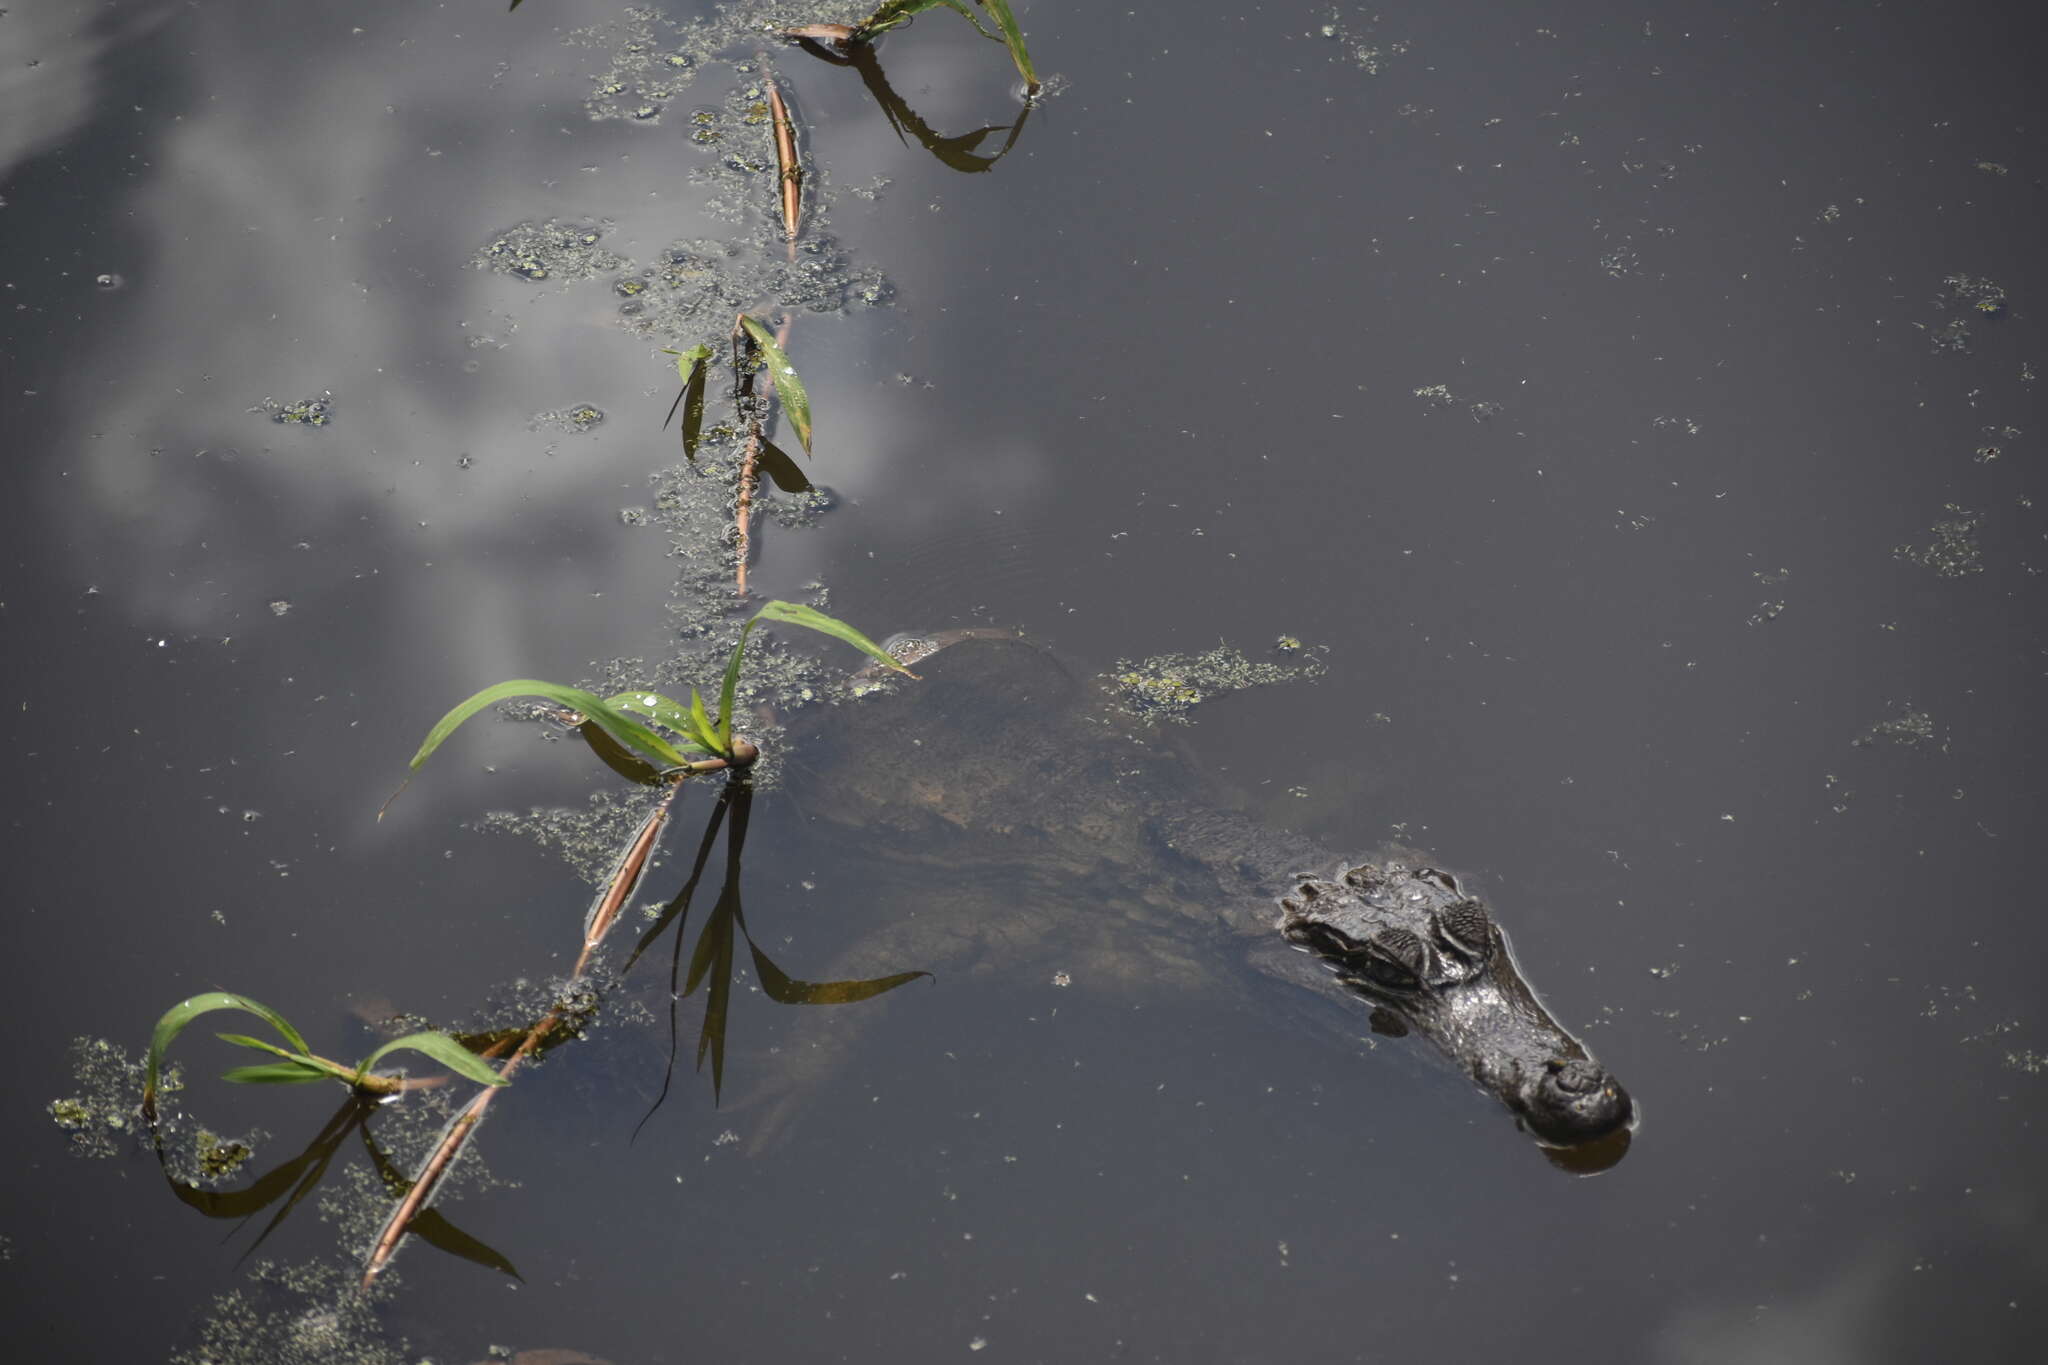 Image of South American Spectacled Caiman